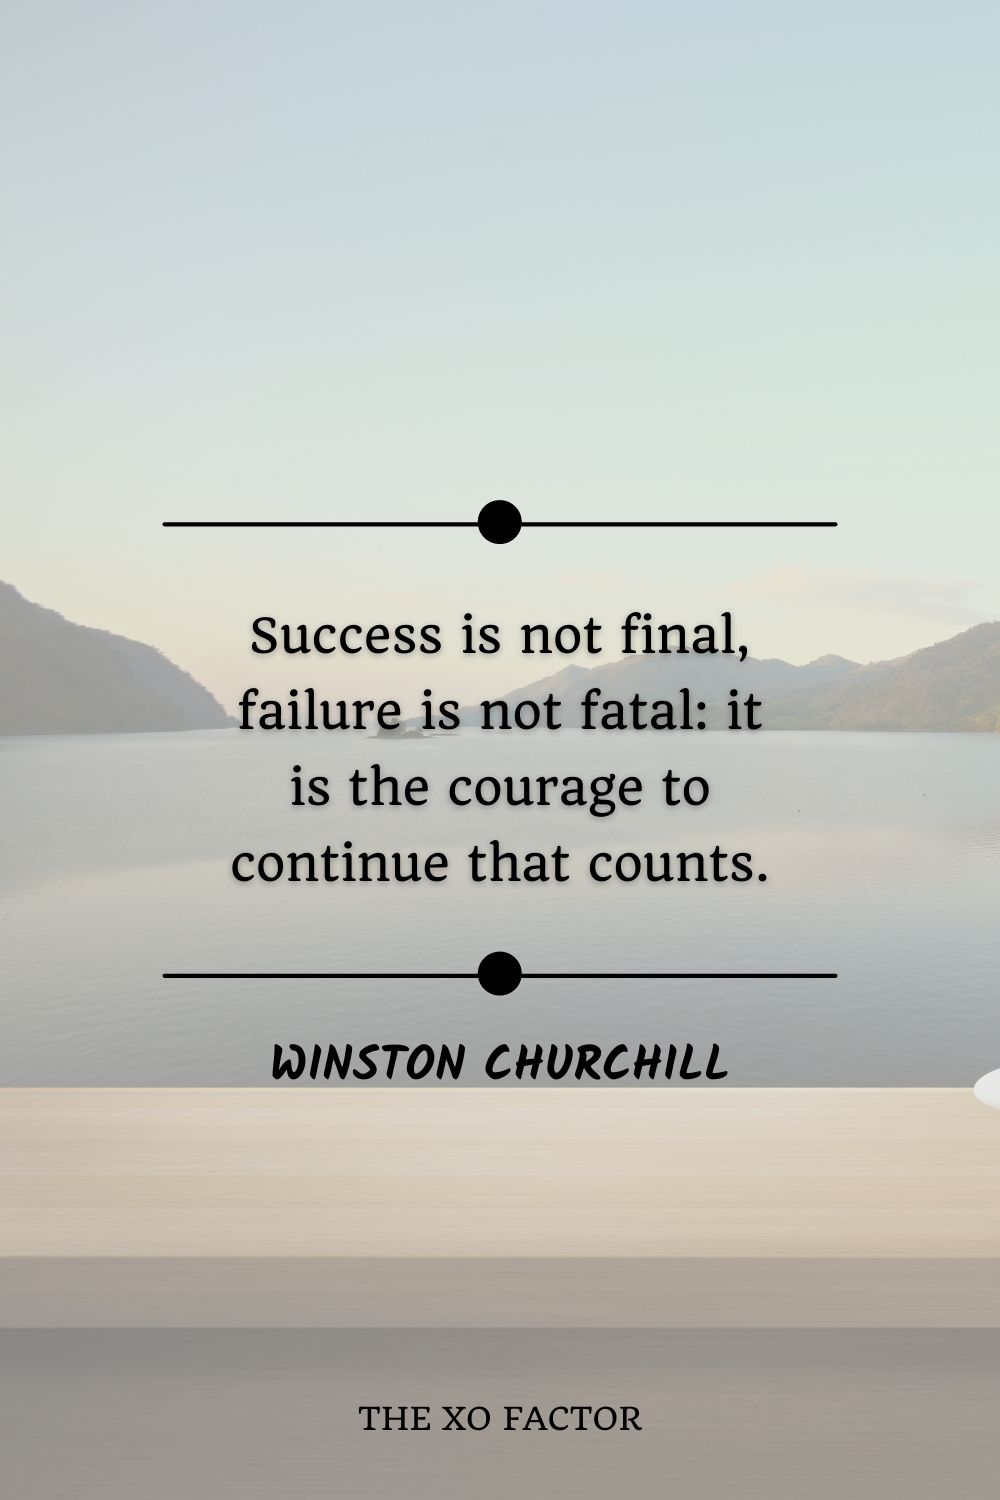 Success is not final, failure is not fatal: it is the courage to continue that counts.” Winston Churchill